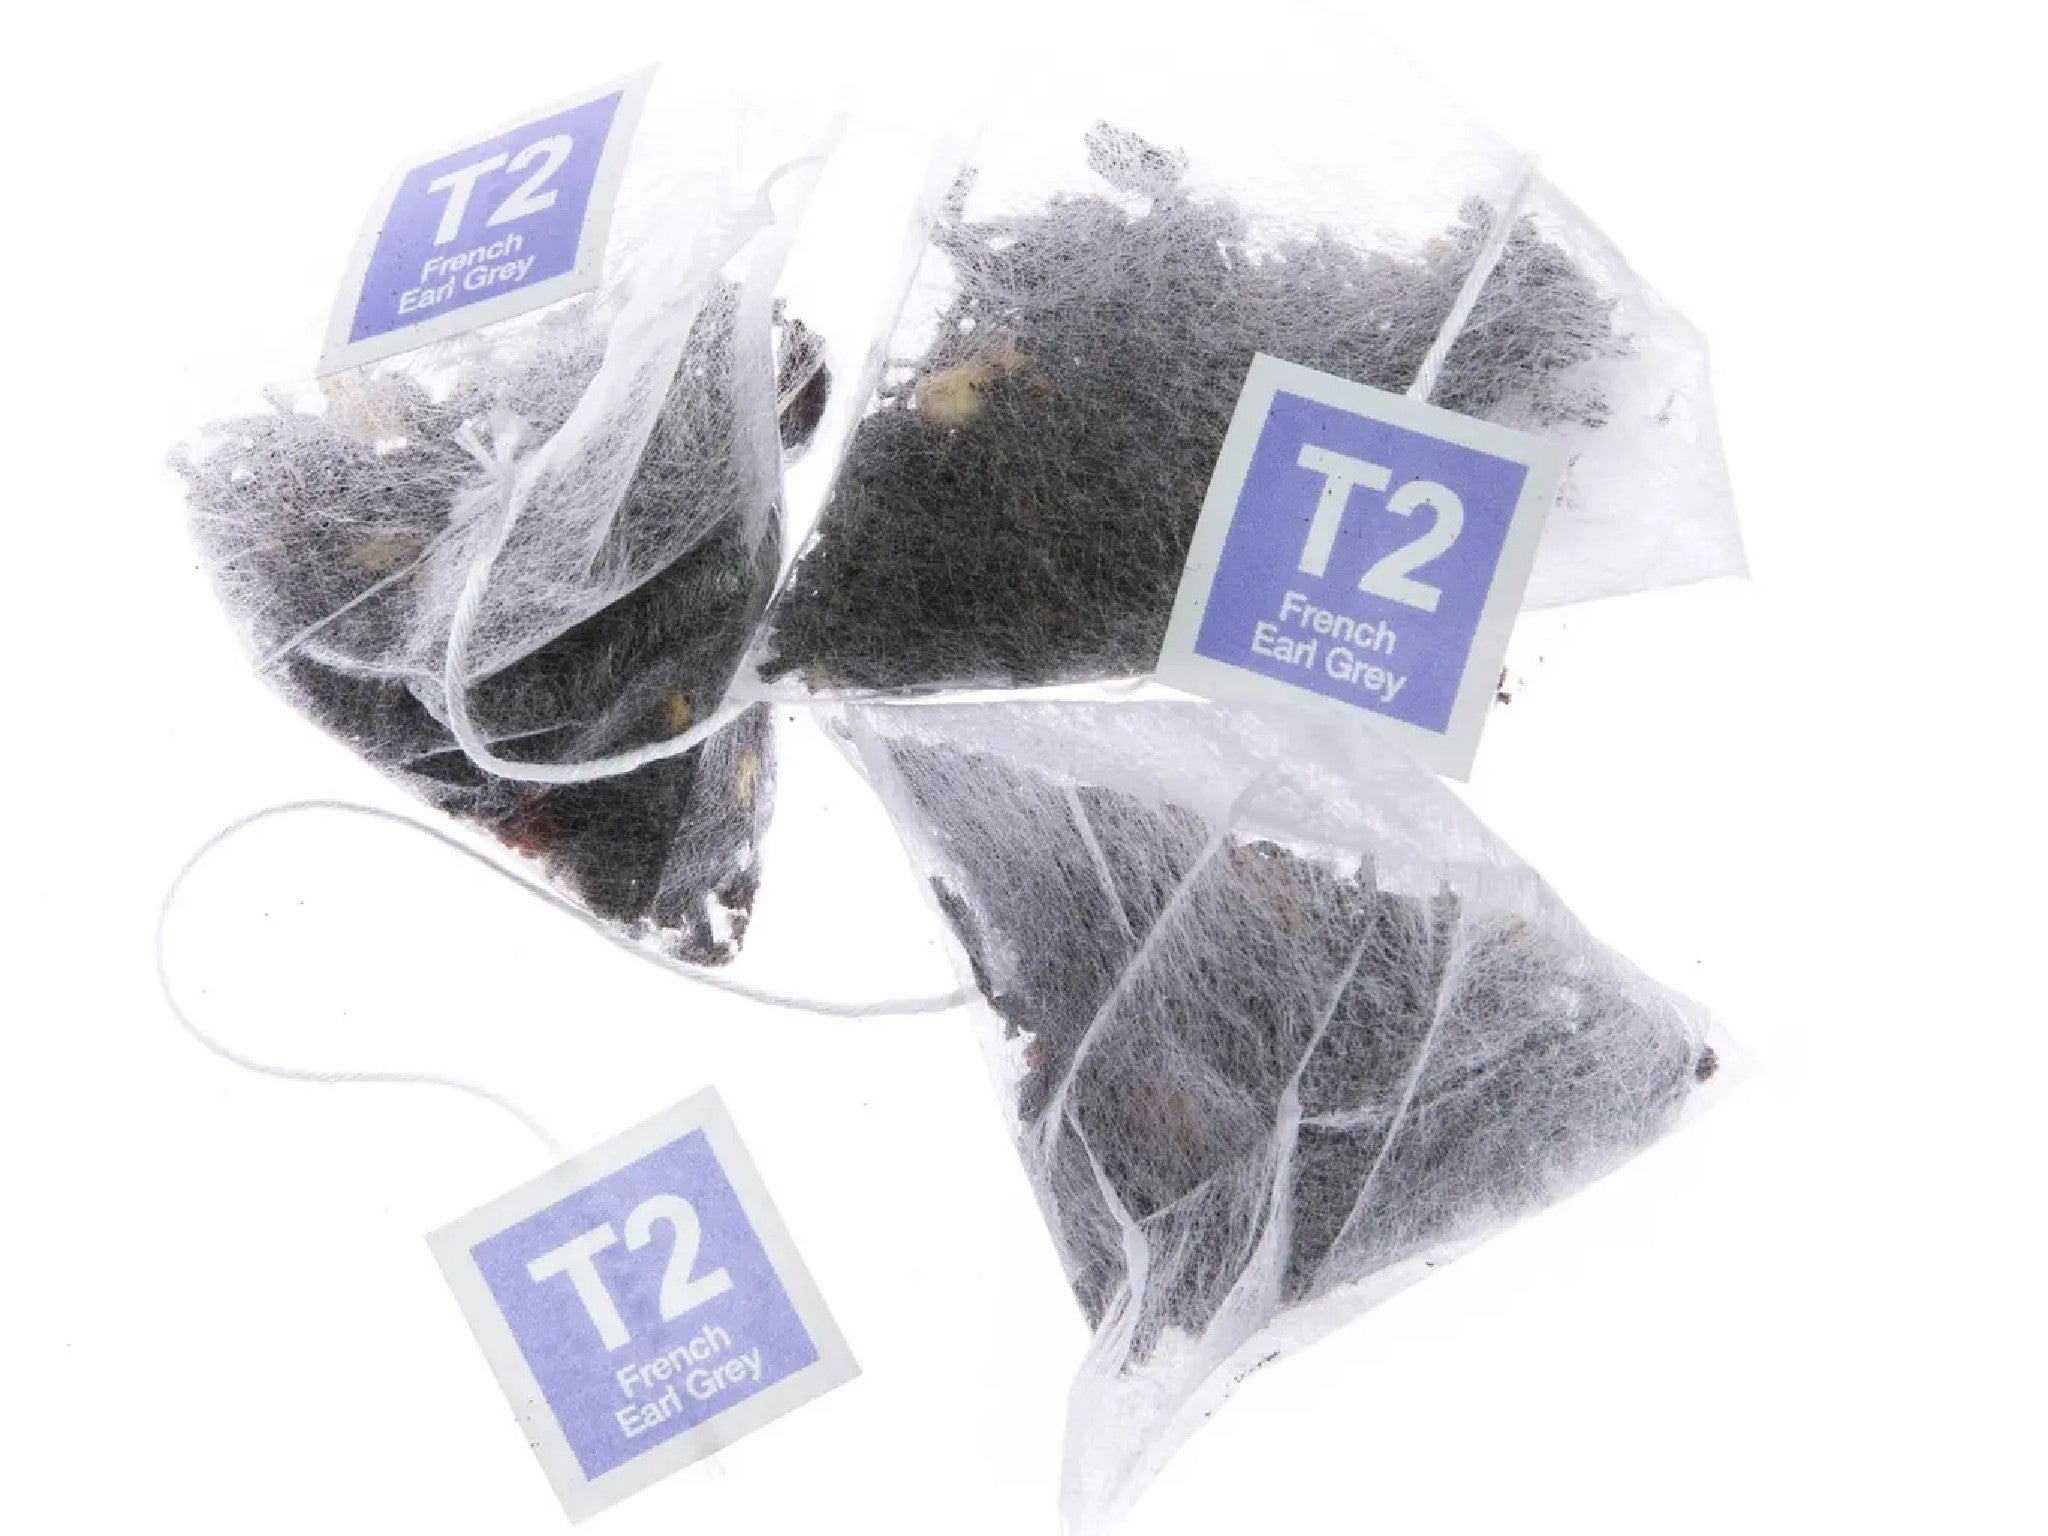 T2 French earl grey teabag gift cube indybest.jpeg